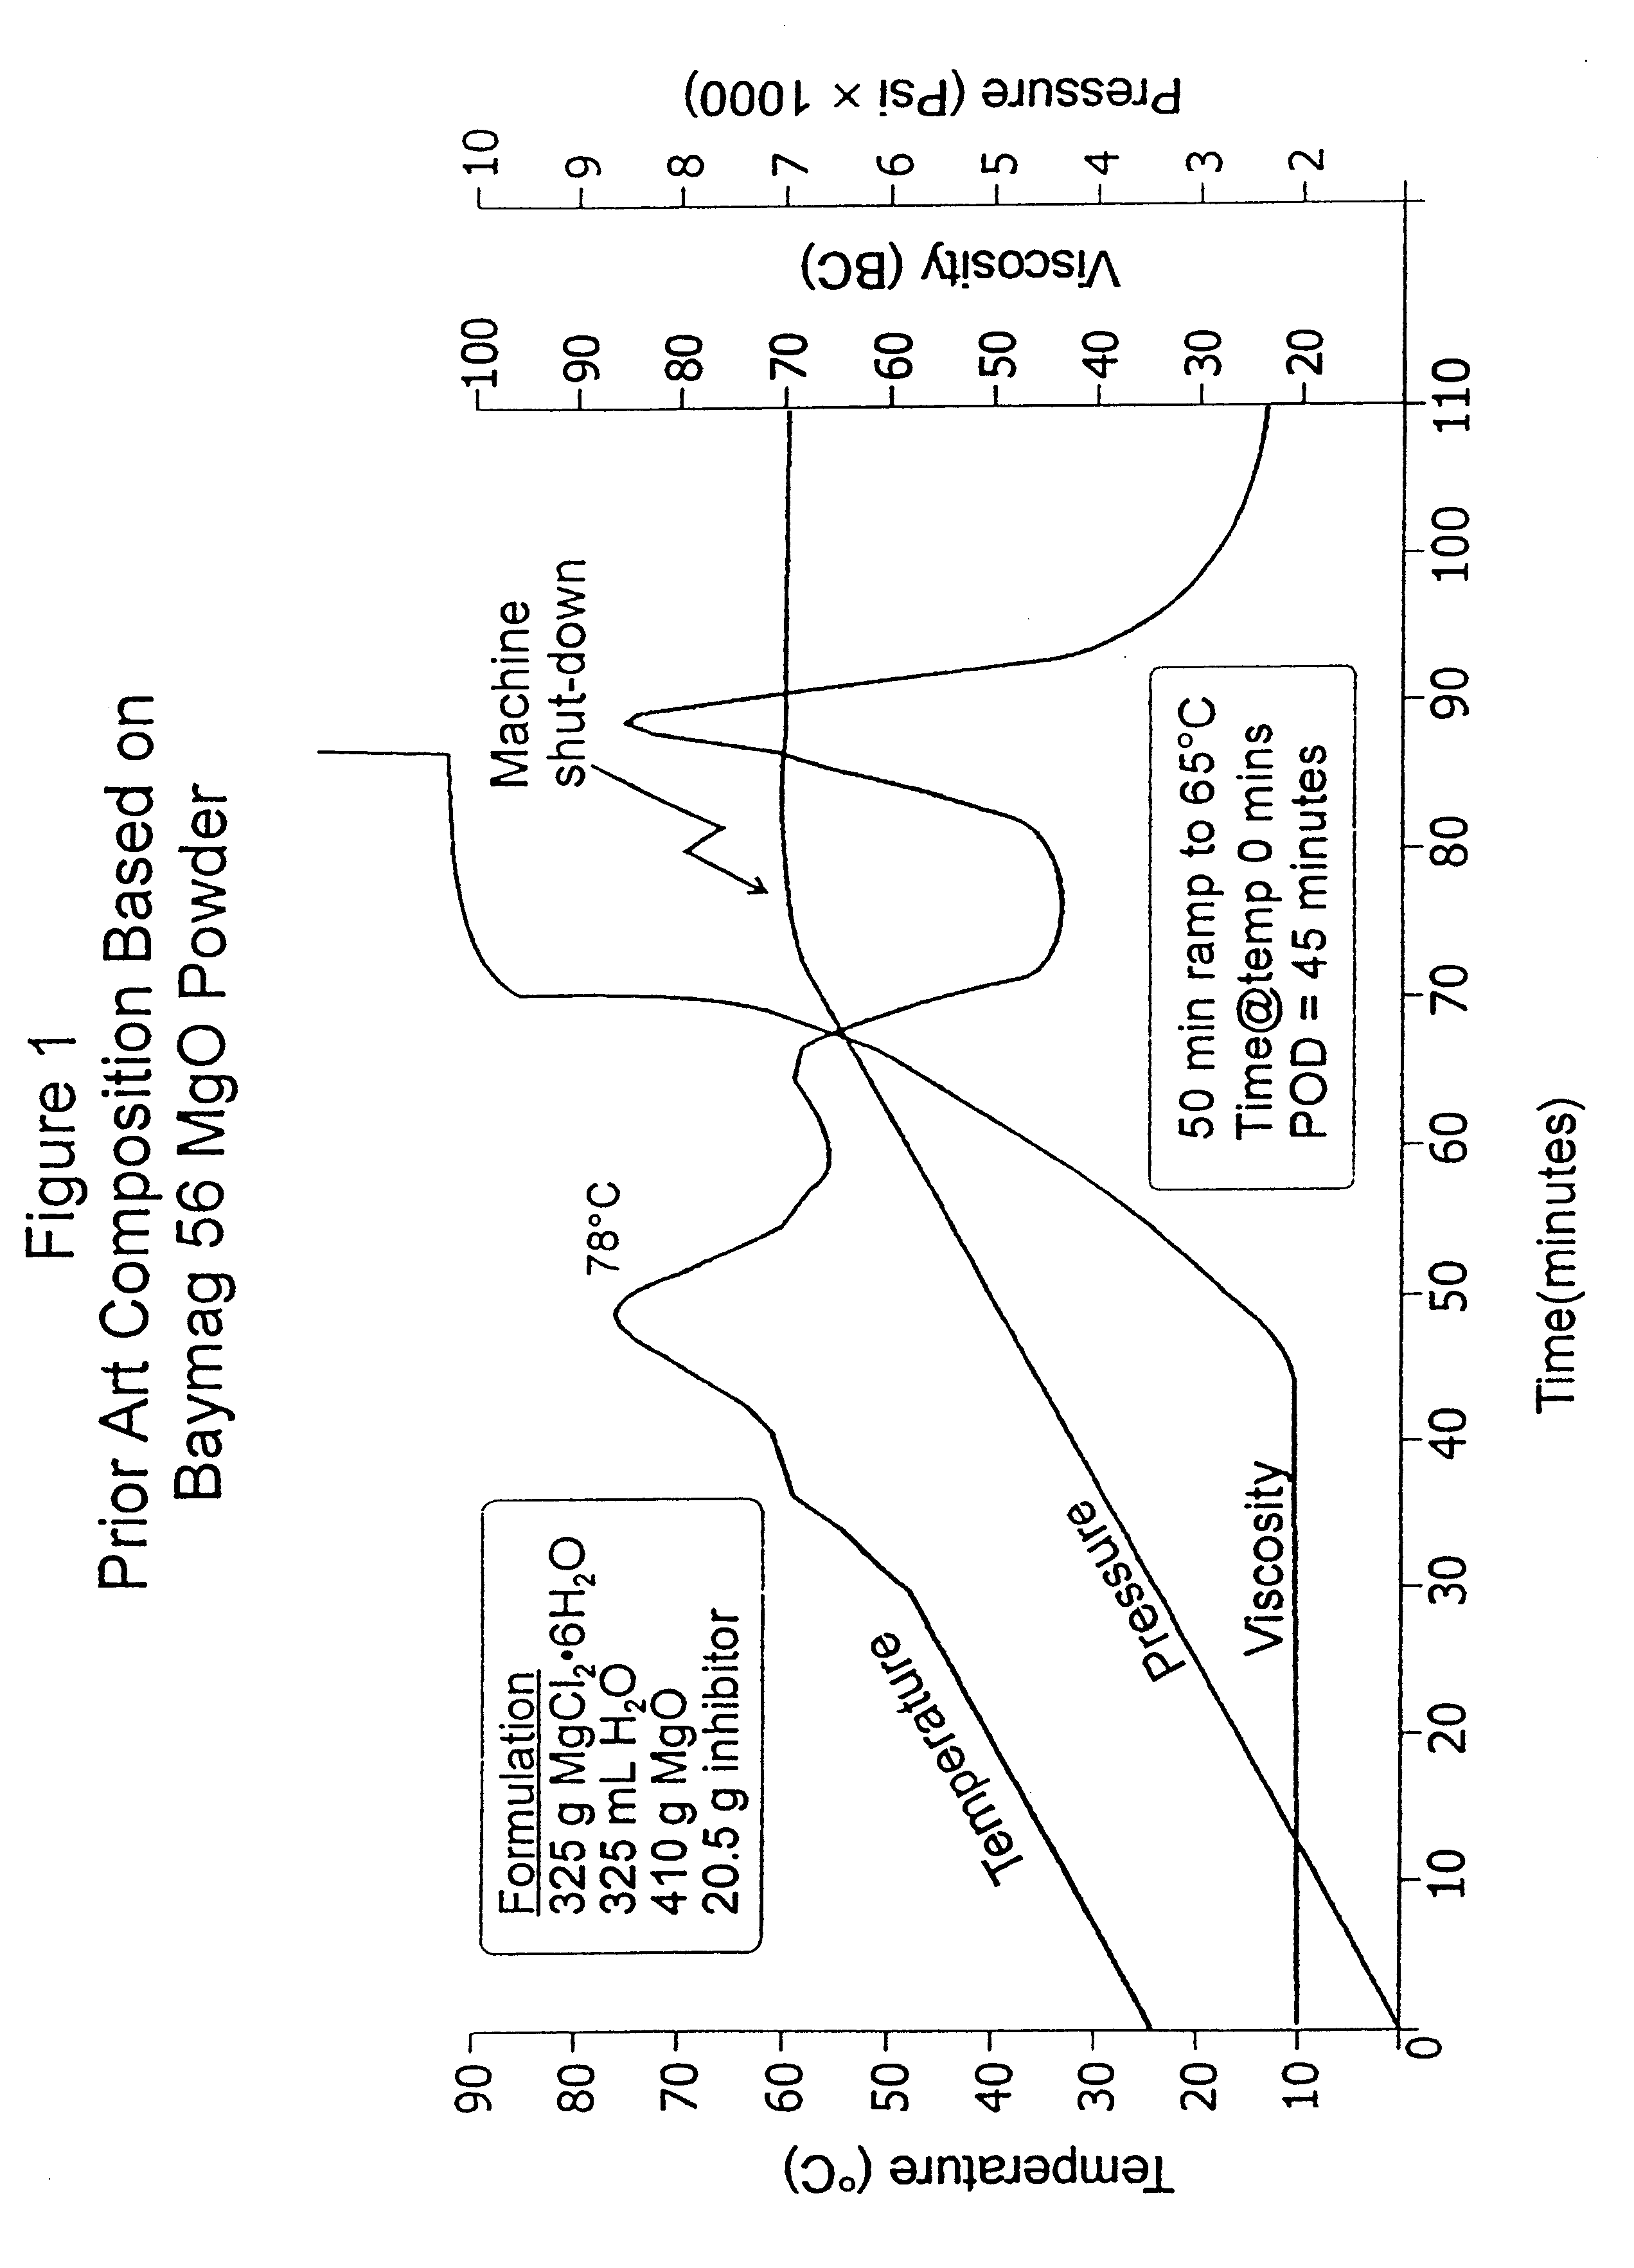 Composition for controlling wellbore fluid and gas invasion and method for using same